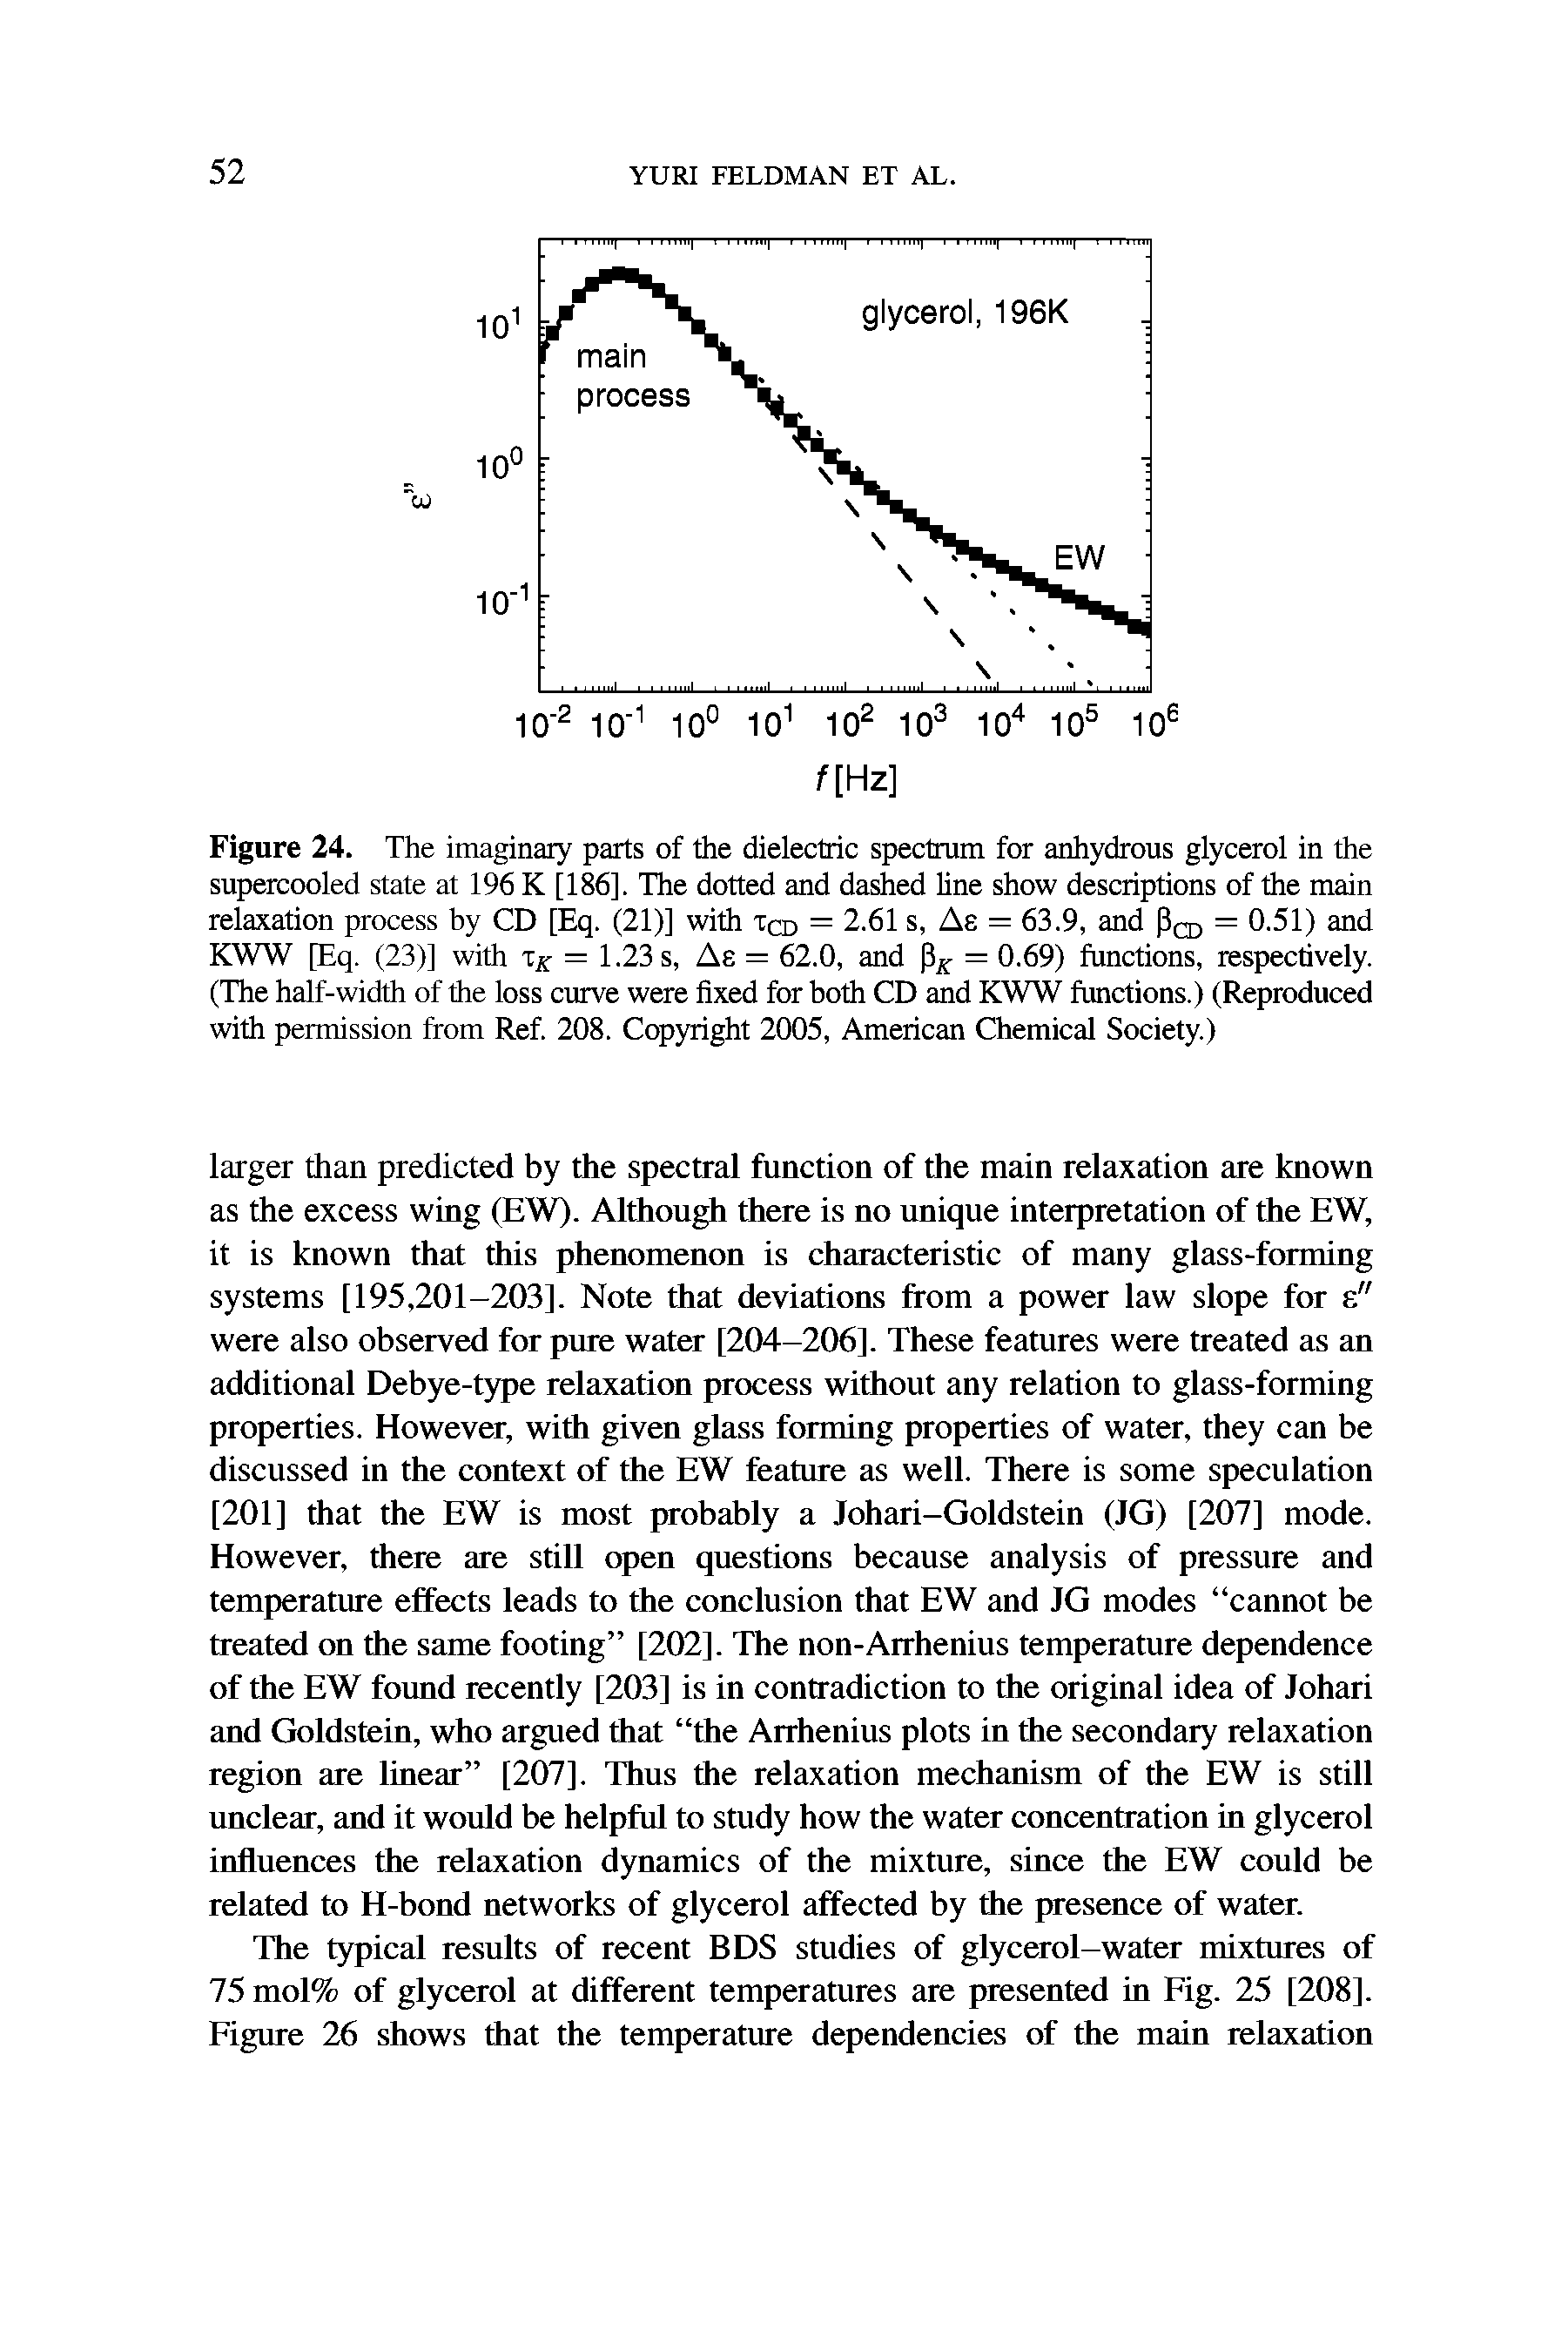 Figure 24. The imaginary parts of the dielectric spectrum for anhydrous glycerol in the supercooled state at 196 K [186]. The dotted and dashed line show descriptions of the main relaxation process by CD [Eq. (21)] with tcd = 2.61 s, Ae = 63.9, and Pq, = 0.51) and KWW [Eq. (23)] with iK — 1.23 s, As = 62.0, and (3 = 0.69) functions, respectively. (The half-width of the loss curve were fixed for both CD and KWW functions.) (Reproduced with permission from Ref. 208. Copyright 2005, American Chemical Society.)...